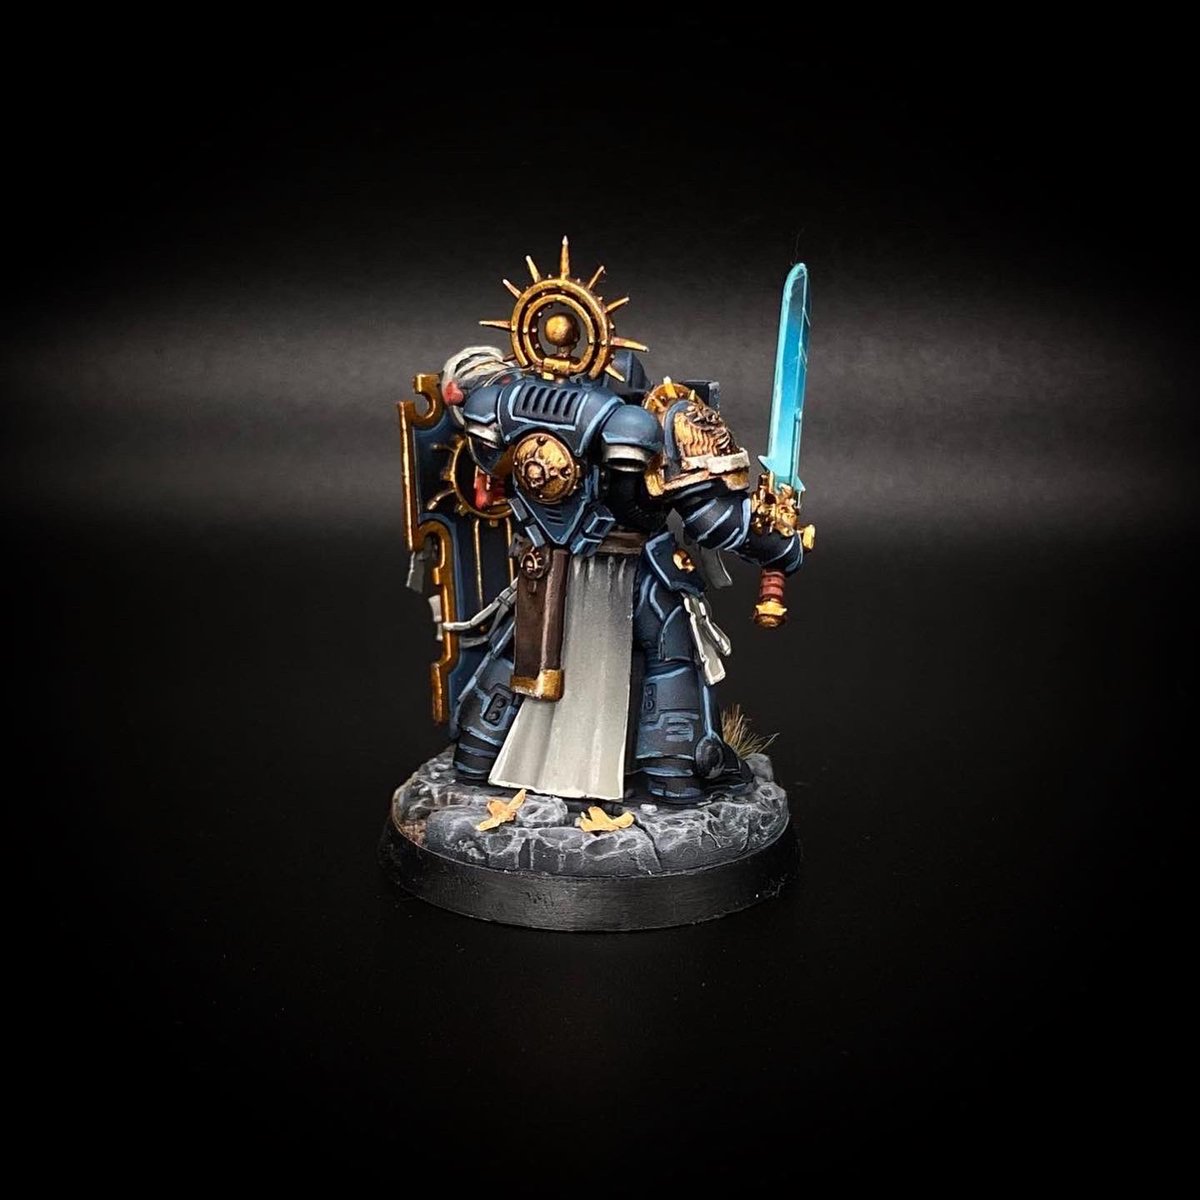 Primaris Captain ⚔️ I never really paint space marines or 40k but I fancied painting one #primariscaptain  #primaris #primarismarines #spacemarines #40k #warhammer40k #paintingwarhammer #warhammercommunity #warmongers #warmaidens #heyminis #theminaturesvault #sharethehobbylove